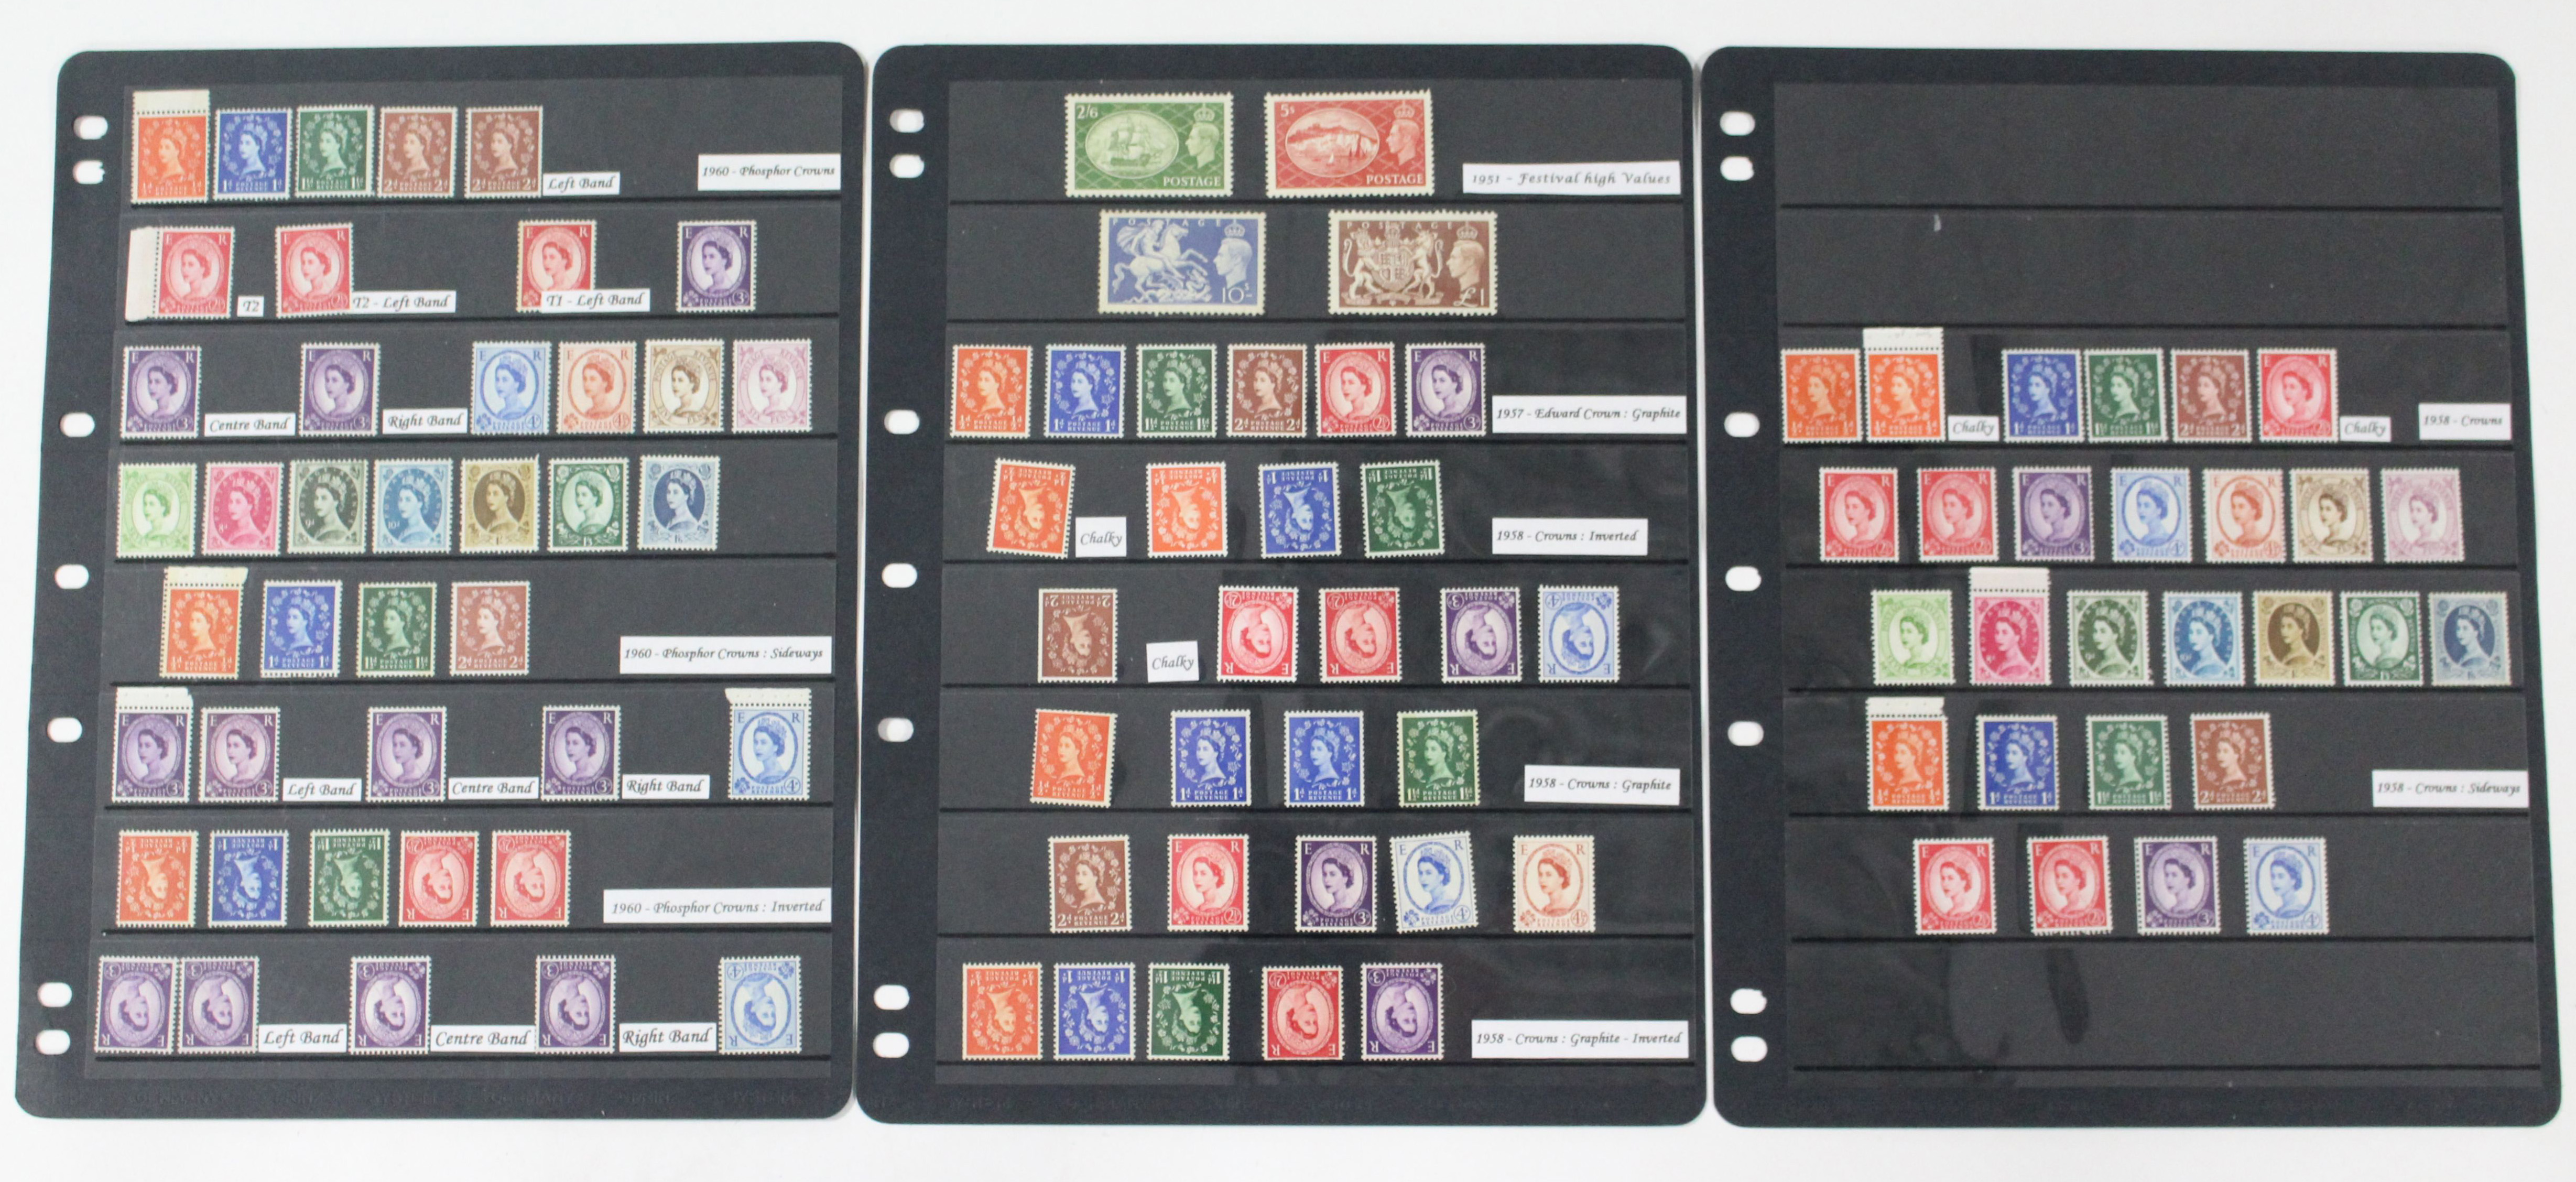 GB Definitives 1951-1960, mint un-mounted, including Festival of Britain high values, ten 1960